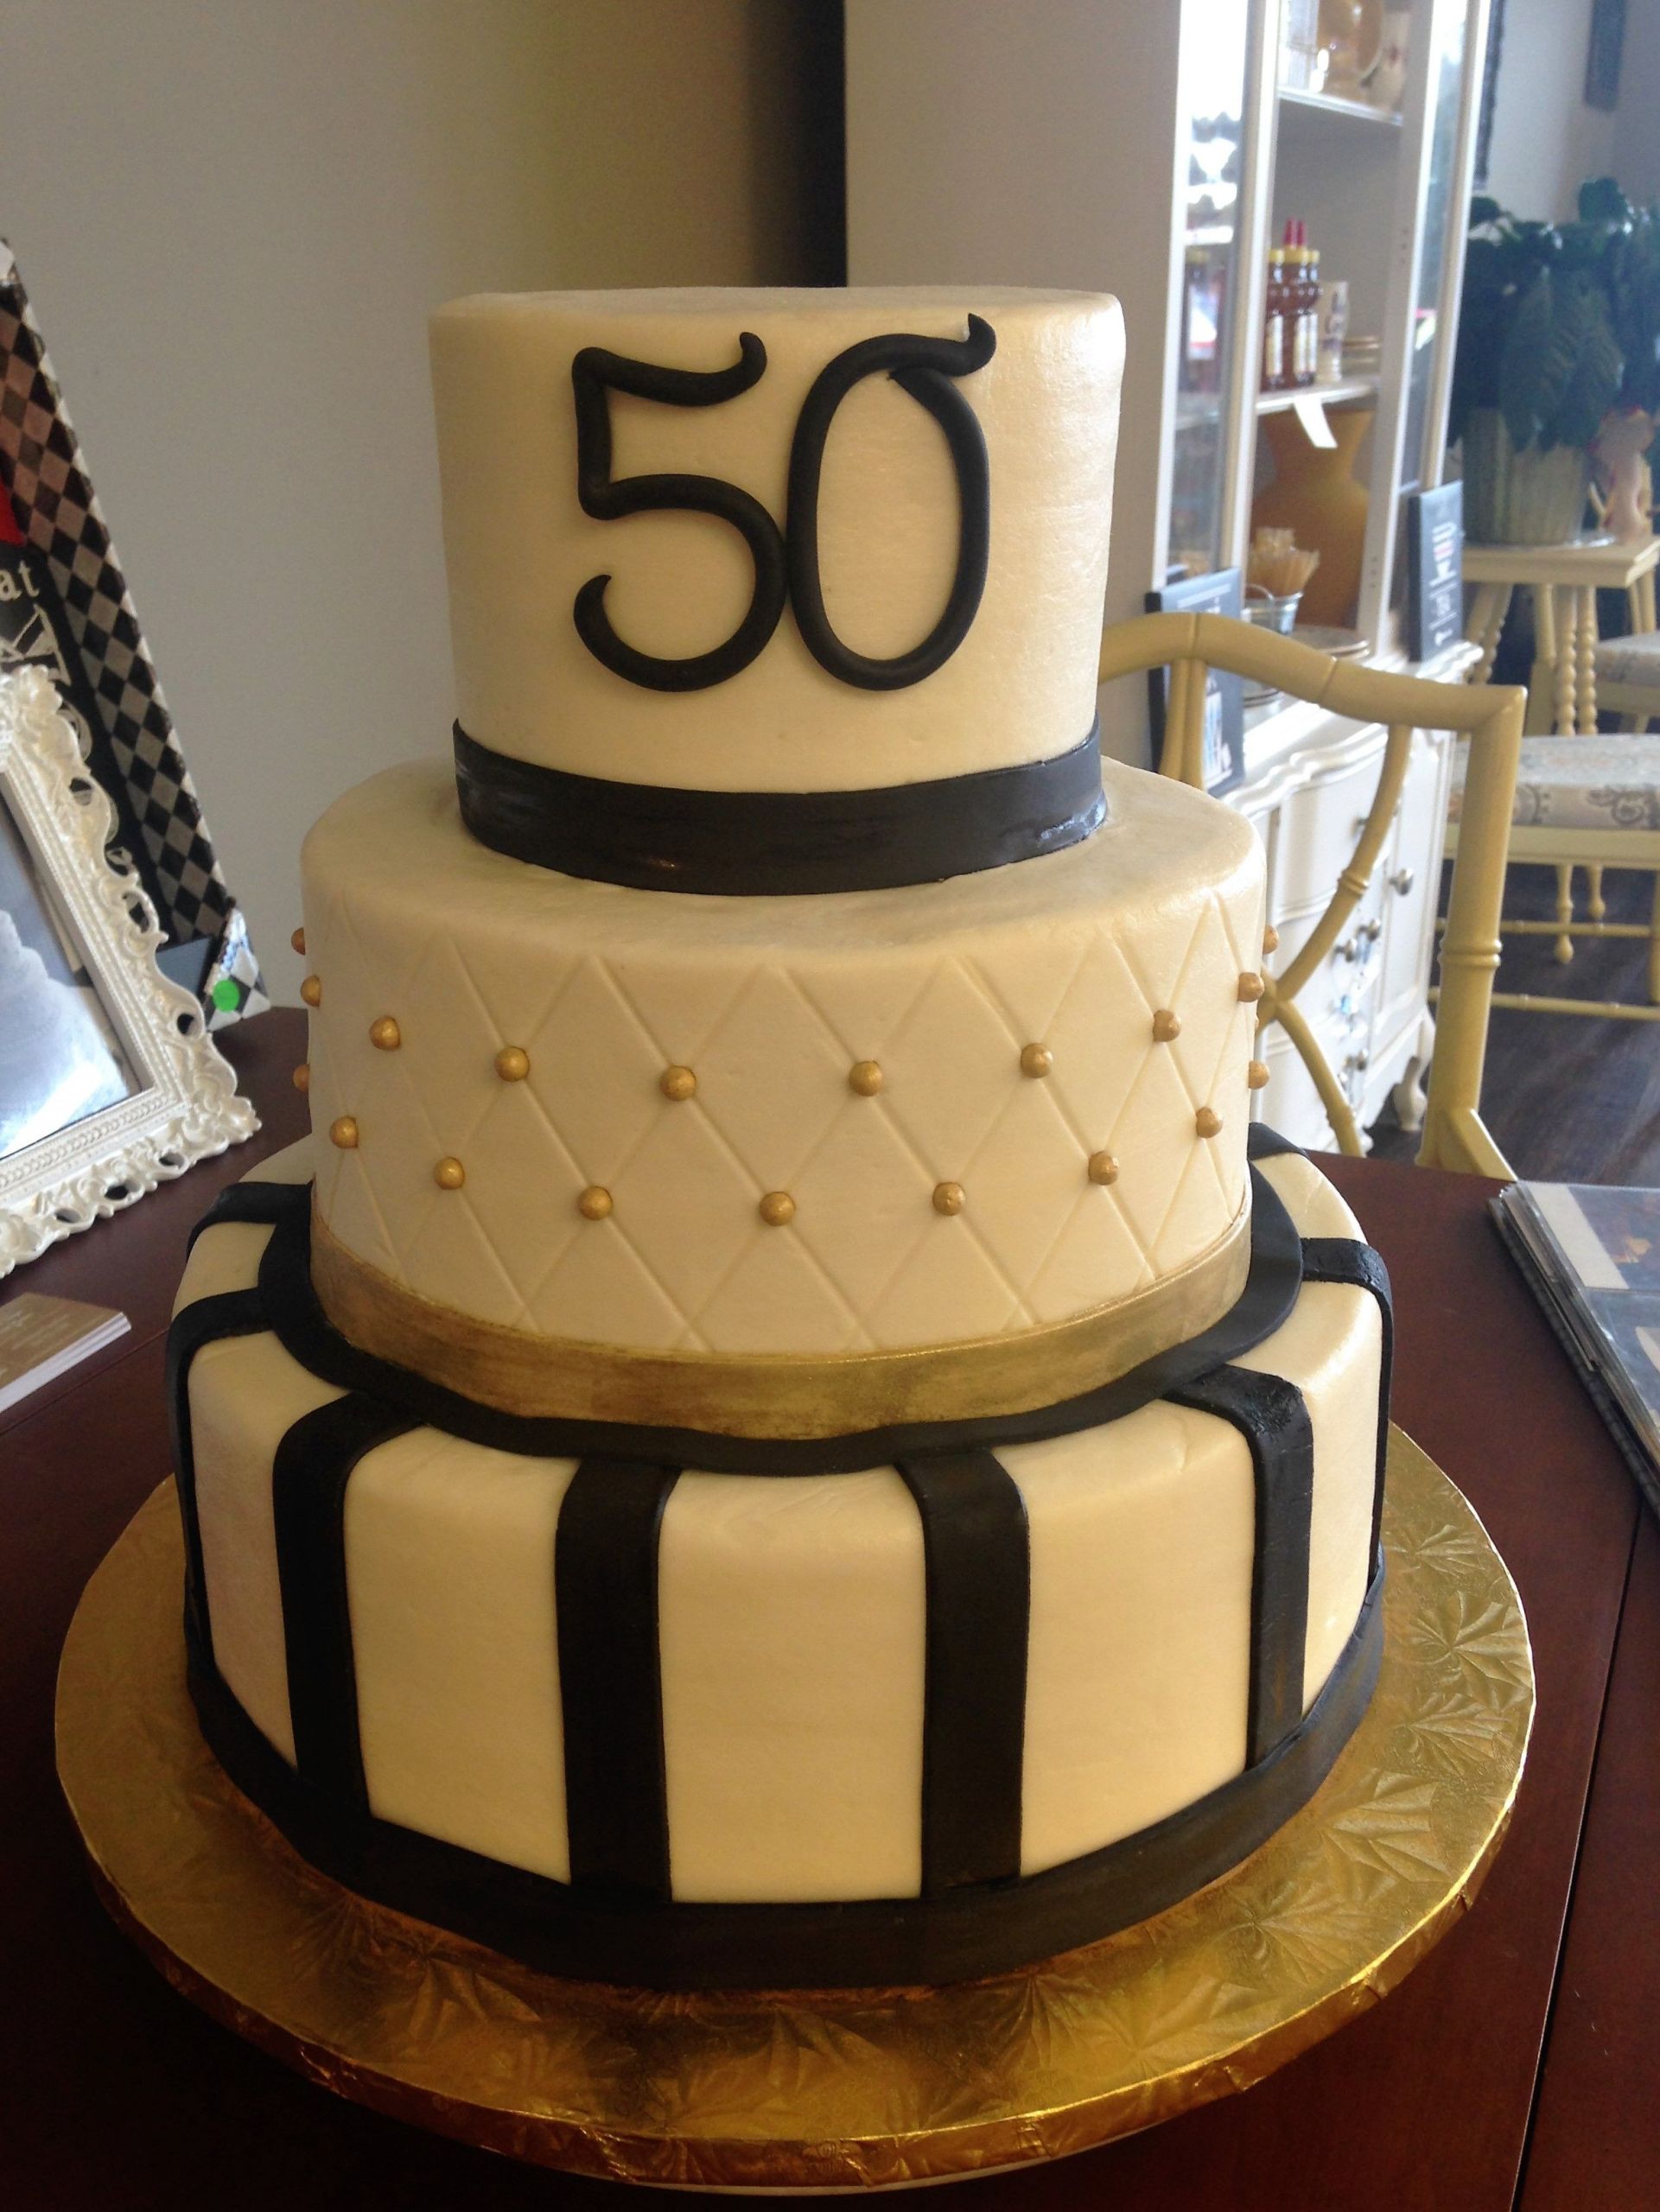 50th Birthday Cake Ideas For Him
 Gold and Black 50th Birthday Cake